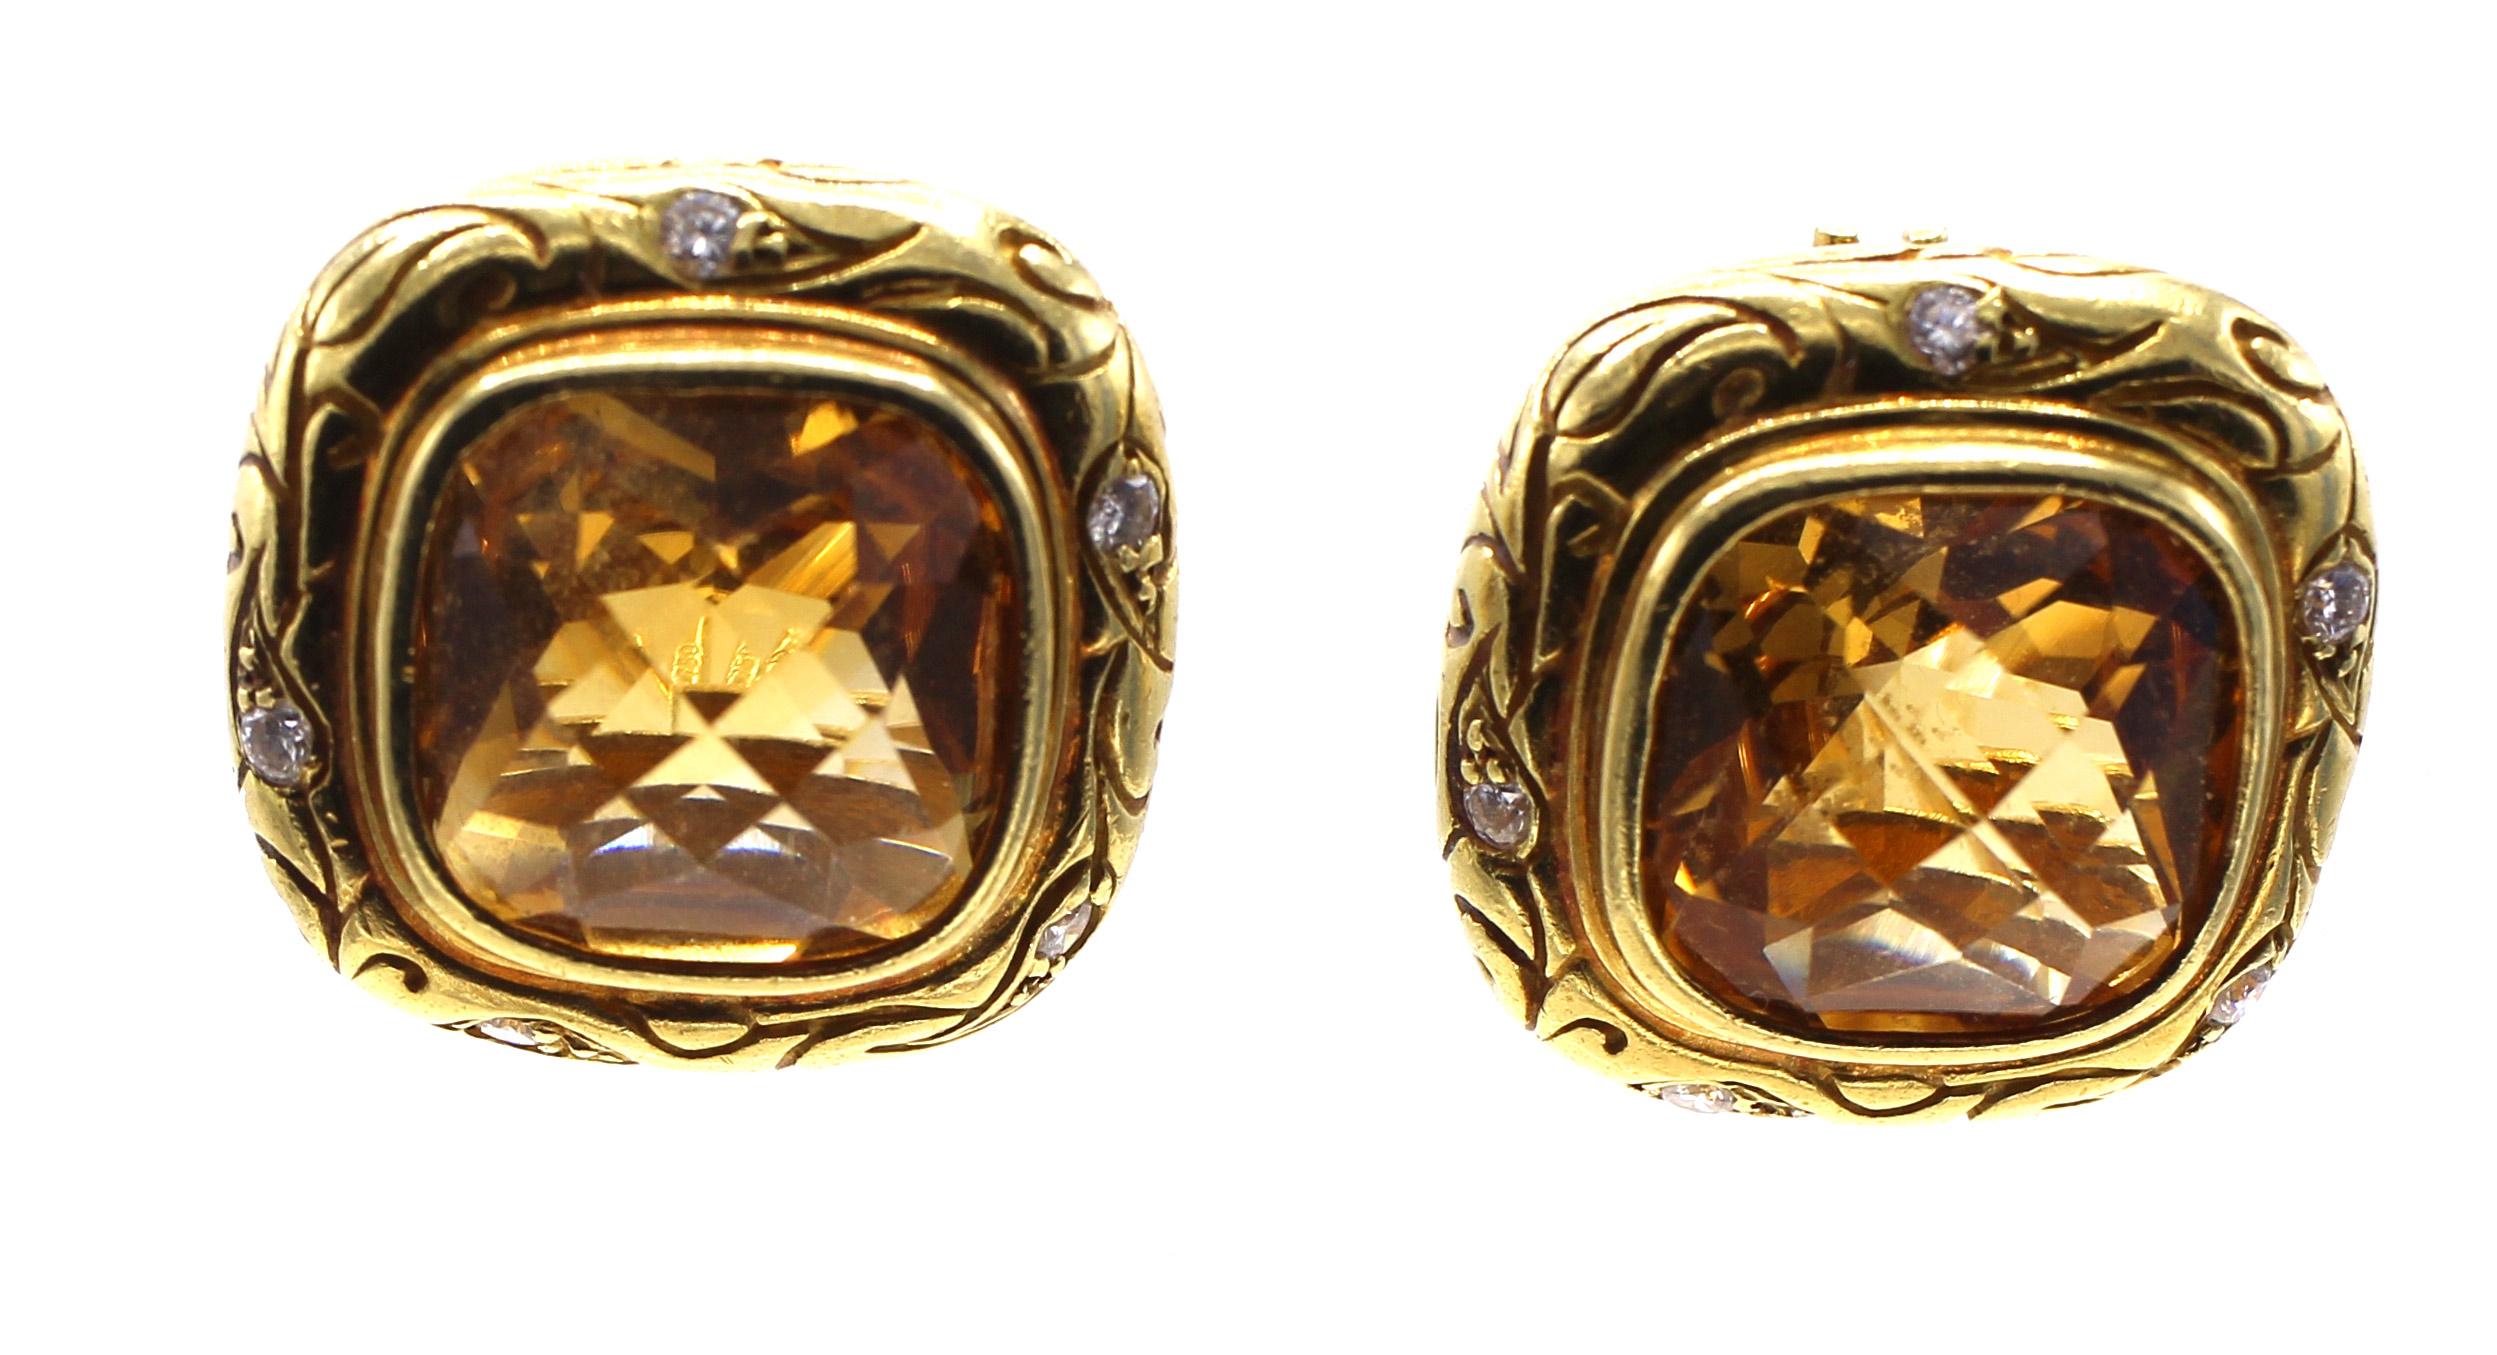 Beautifully designed and masterfully handcrafted in 18 karat yellow gold by Seidengang. 2 perfectly matched square bright orangy-yellow citrines with a domed multifaceted top give these gemstones an incredible life and fire. Set in a bezel of mated